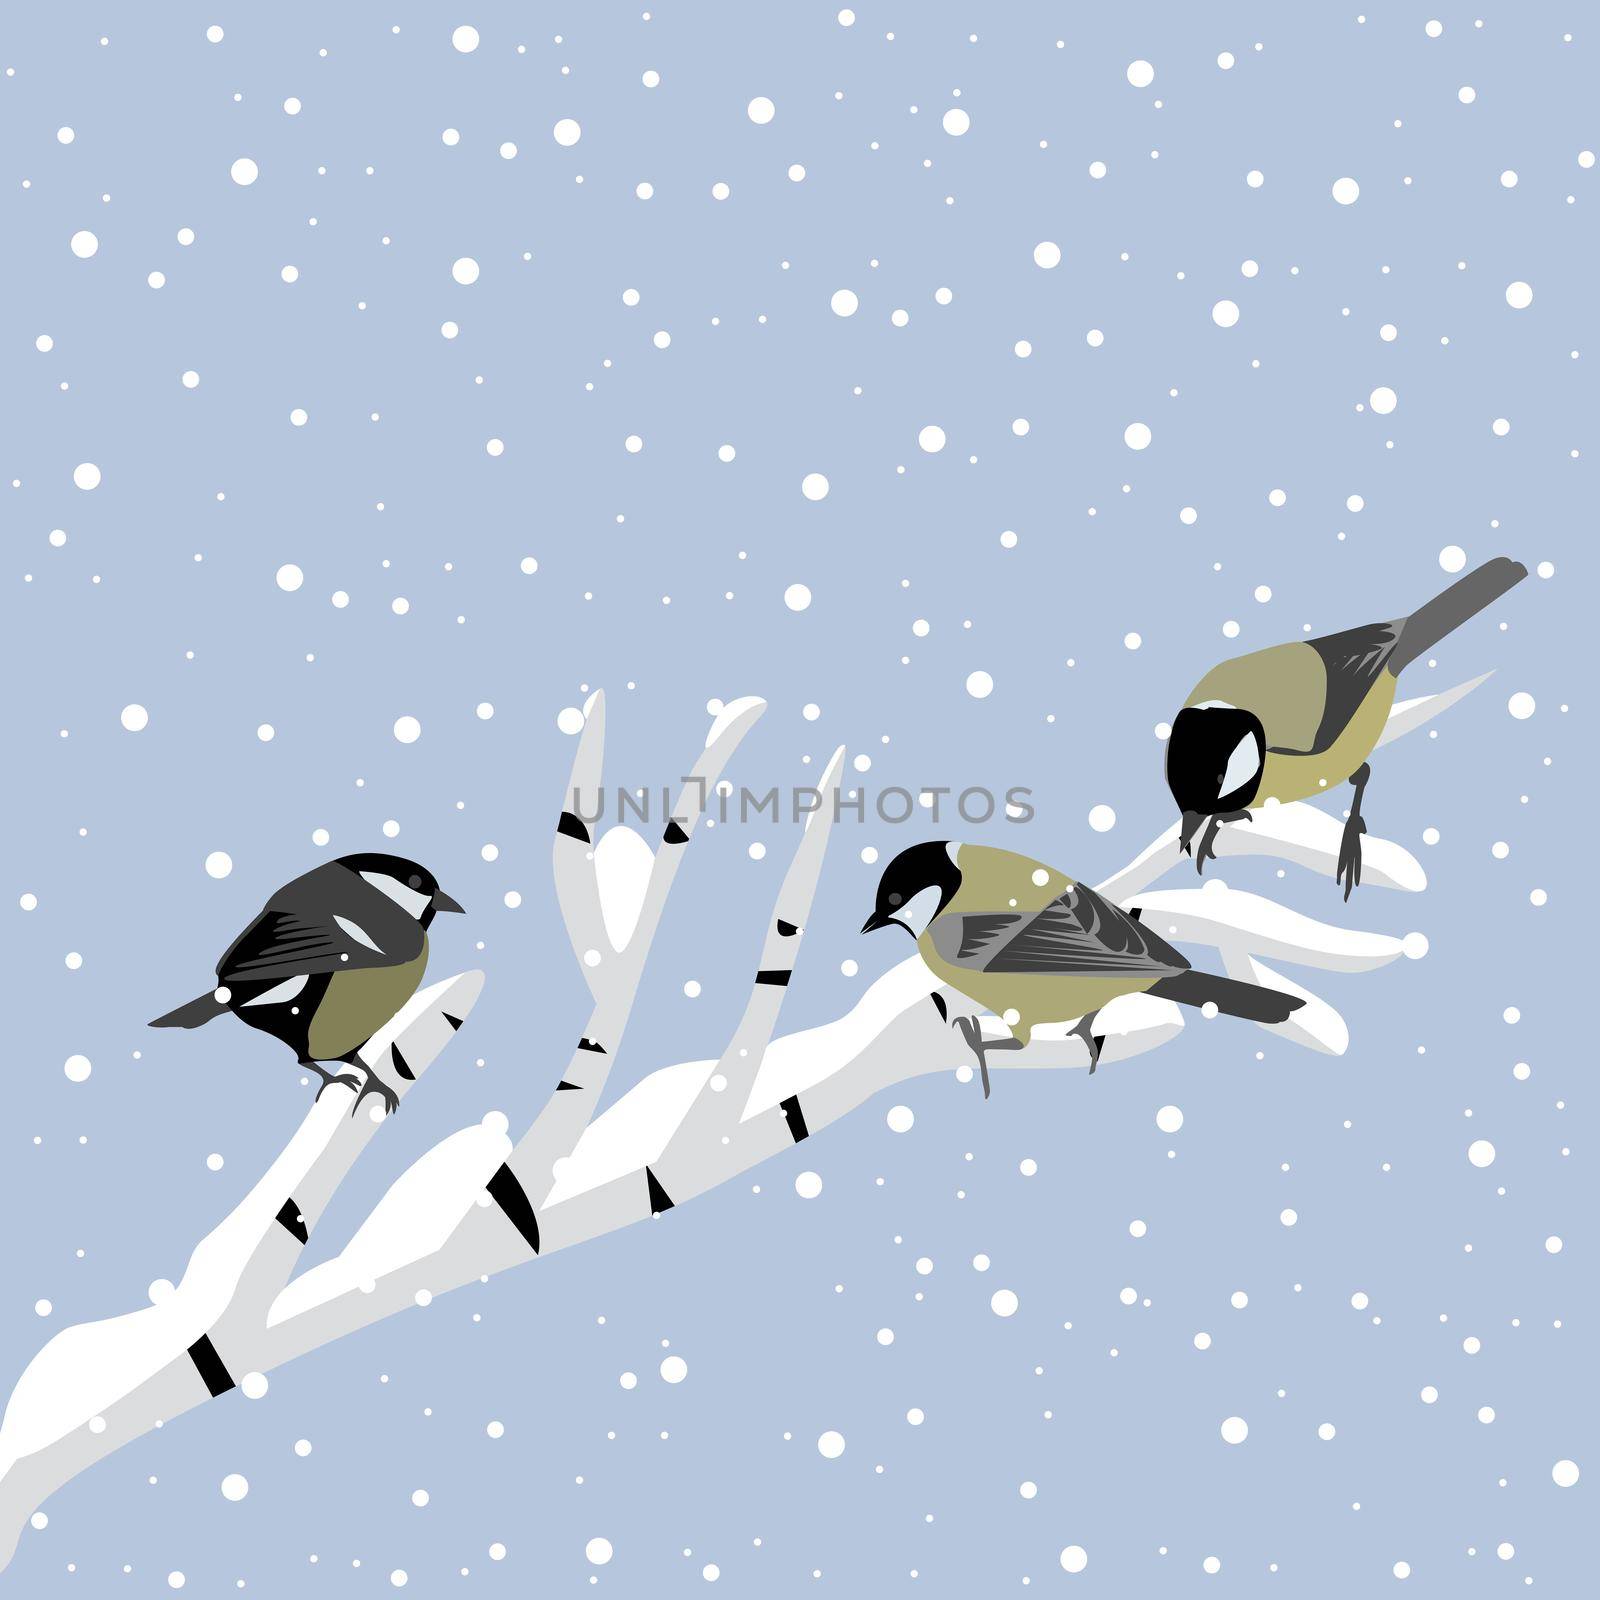 Winter background with tits on birch branch by hibrida13